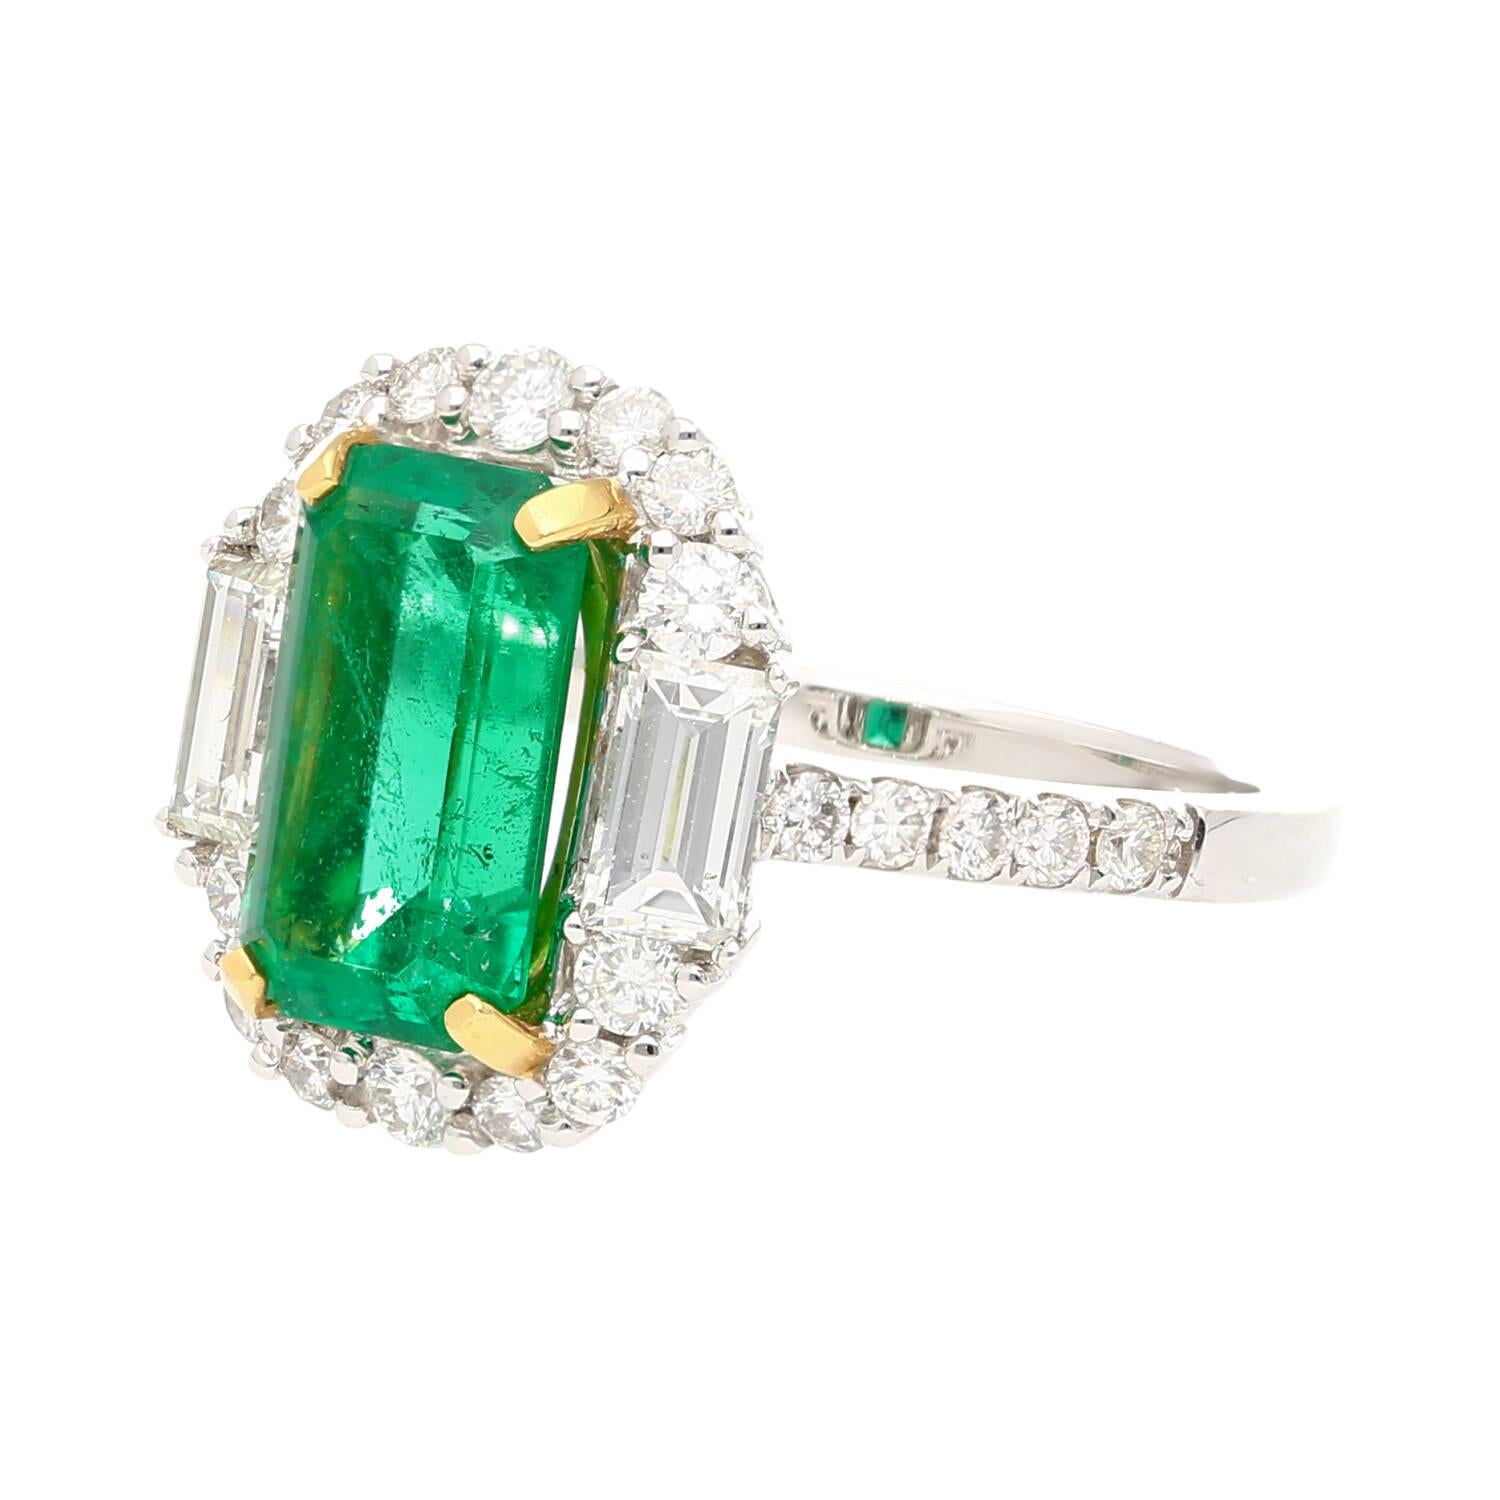 2.22 carat natural Colombian Emerald and Diamond Ring. Centering a lustrous emerald-cut emerald, measuring 10.3 x 6 MM, a desirable elongated shape that gracefully enhances the length of the finger.

The emerald is flanked by two baguette-cut